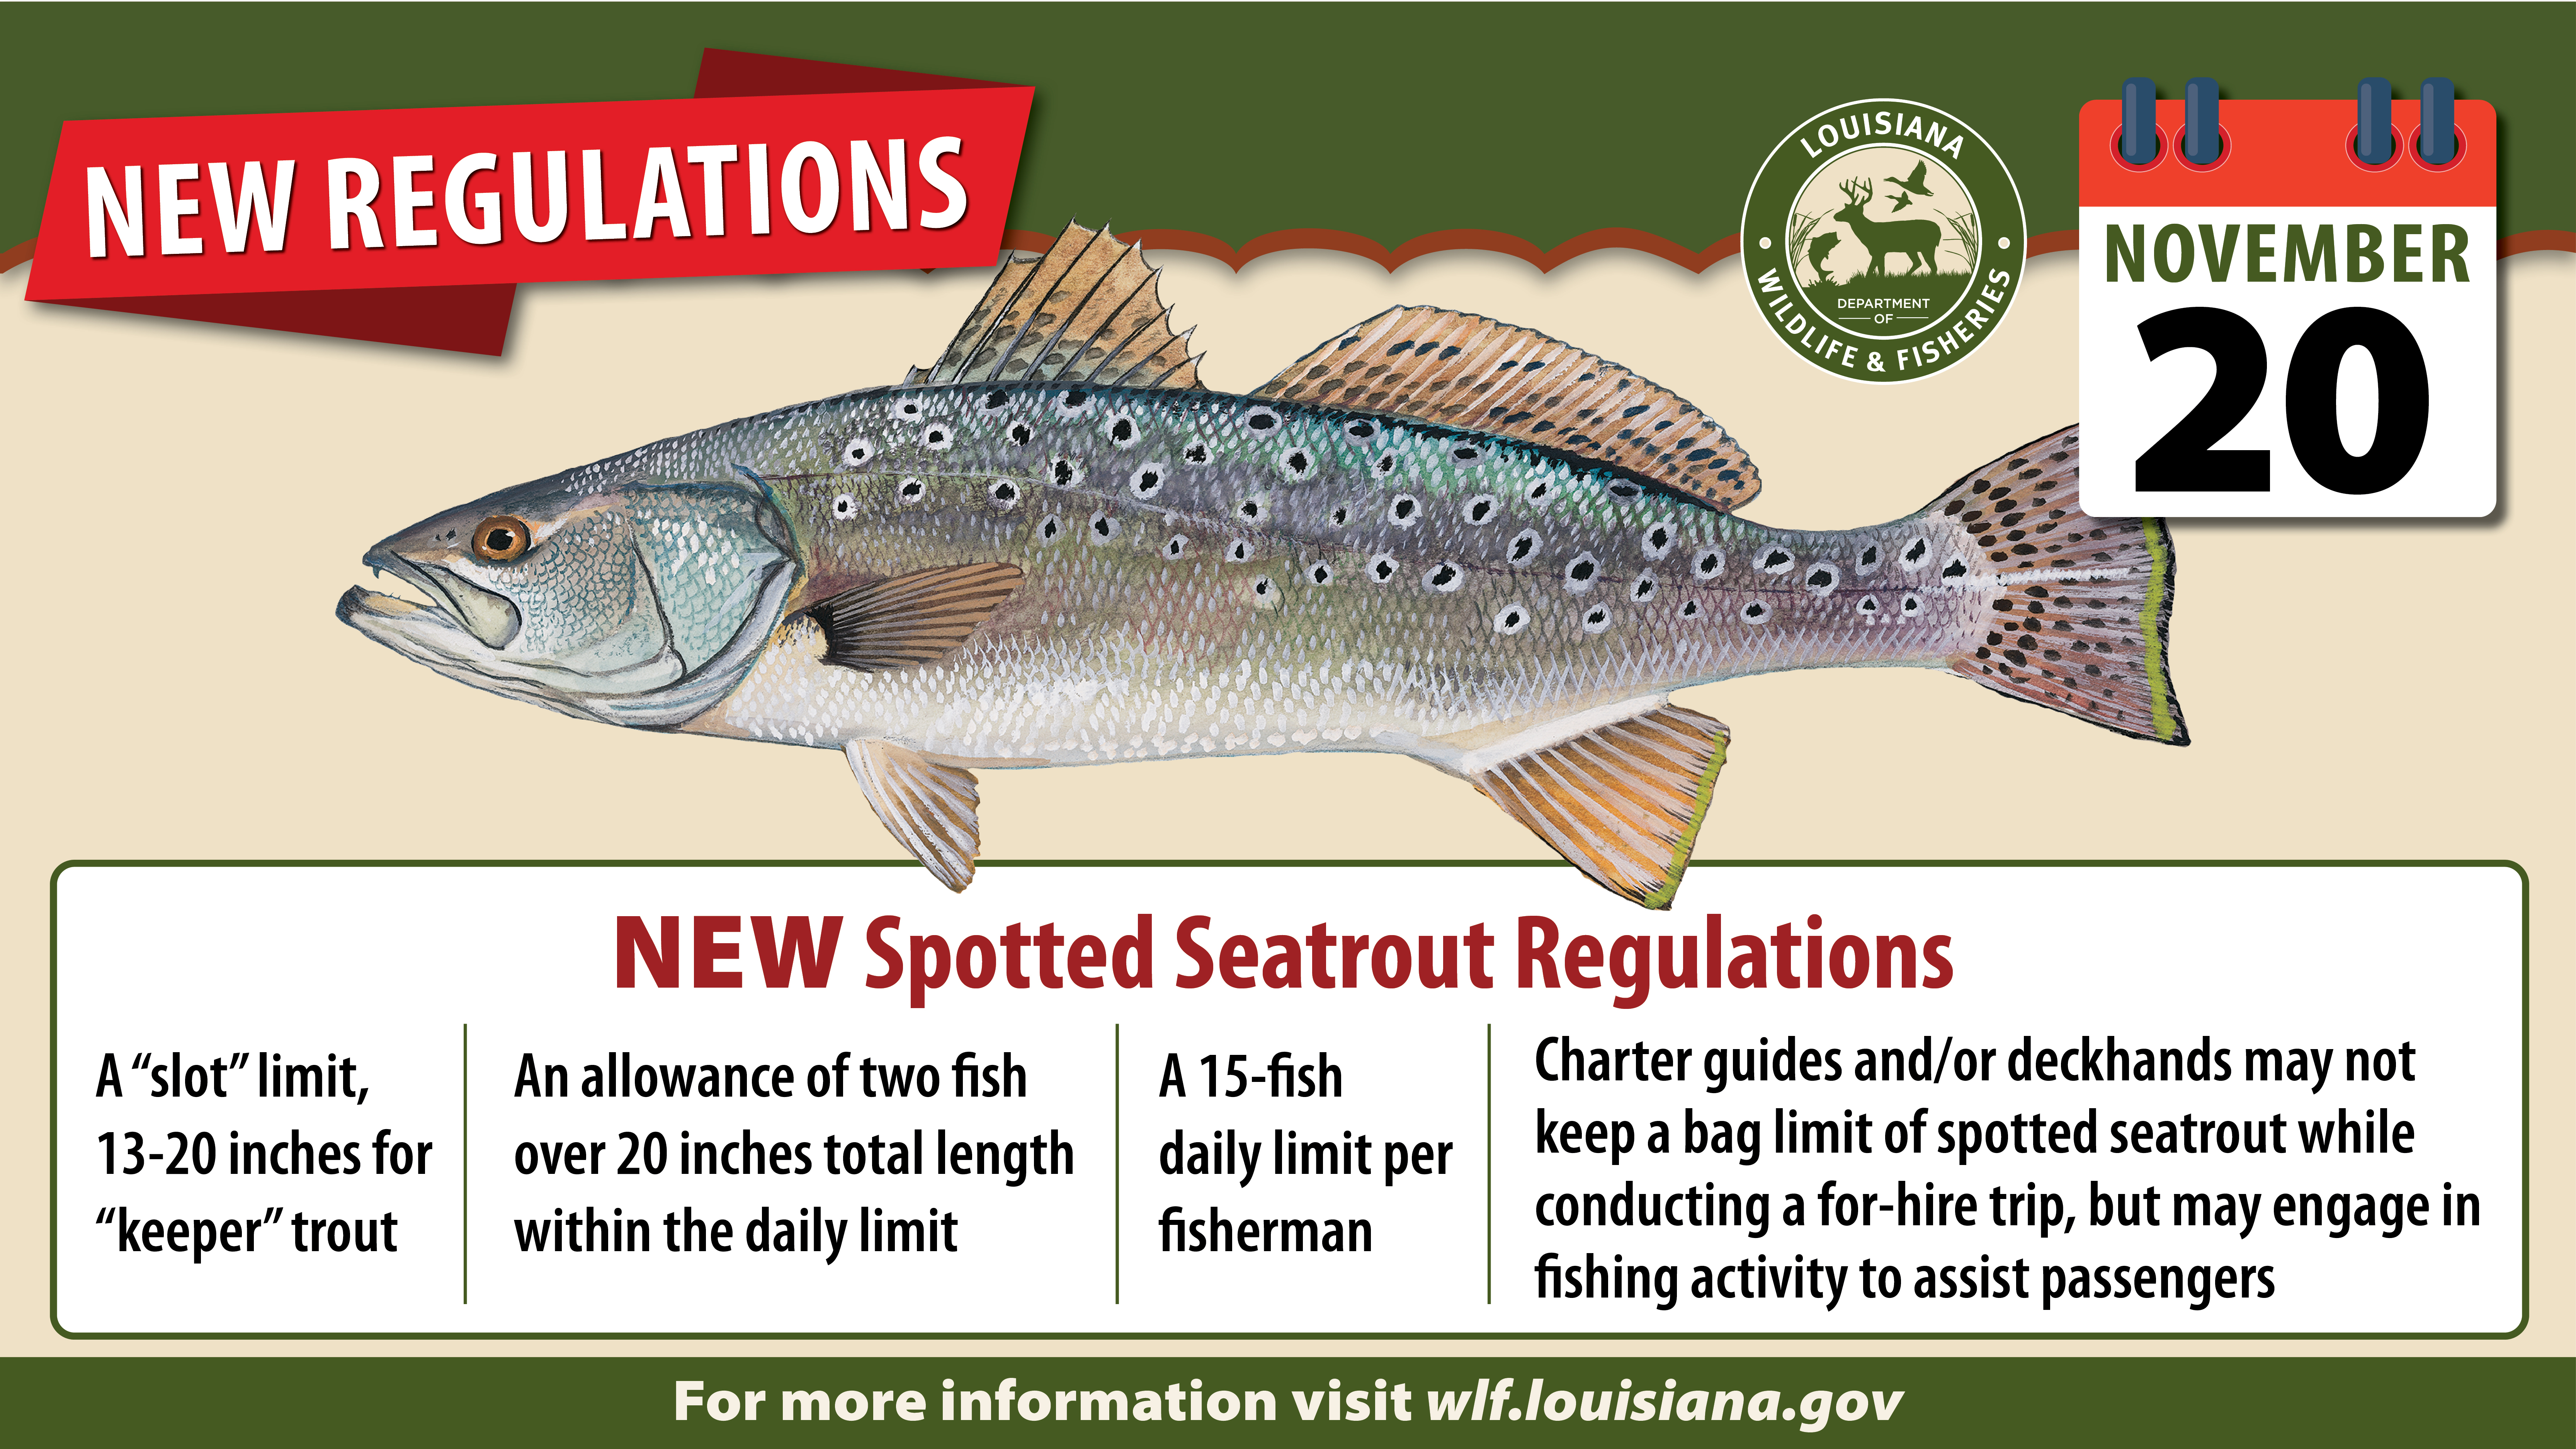 https://www.wlf.louisiana.gov/assets/Fishing/Recreational_Fishing/Images/1600x900-Spotted-Seatrout-Graphic-nov-3.jpg